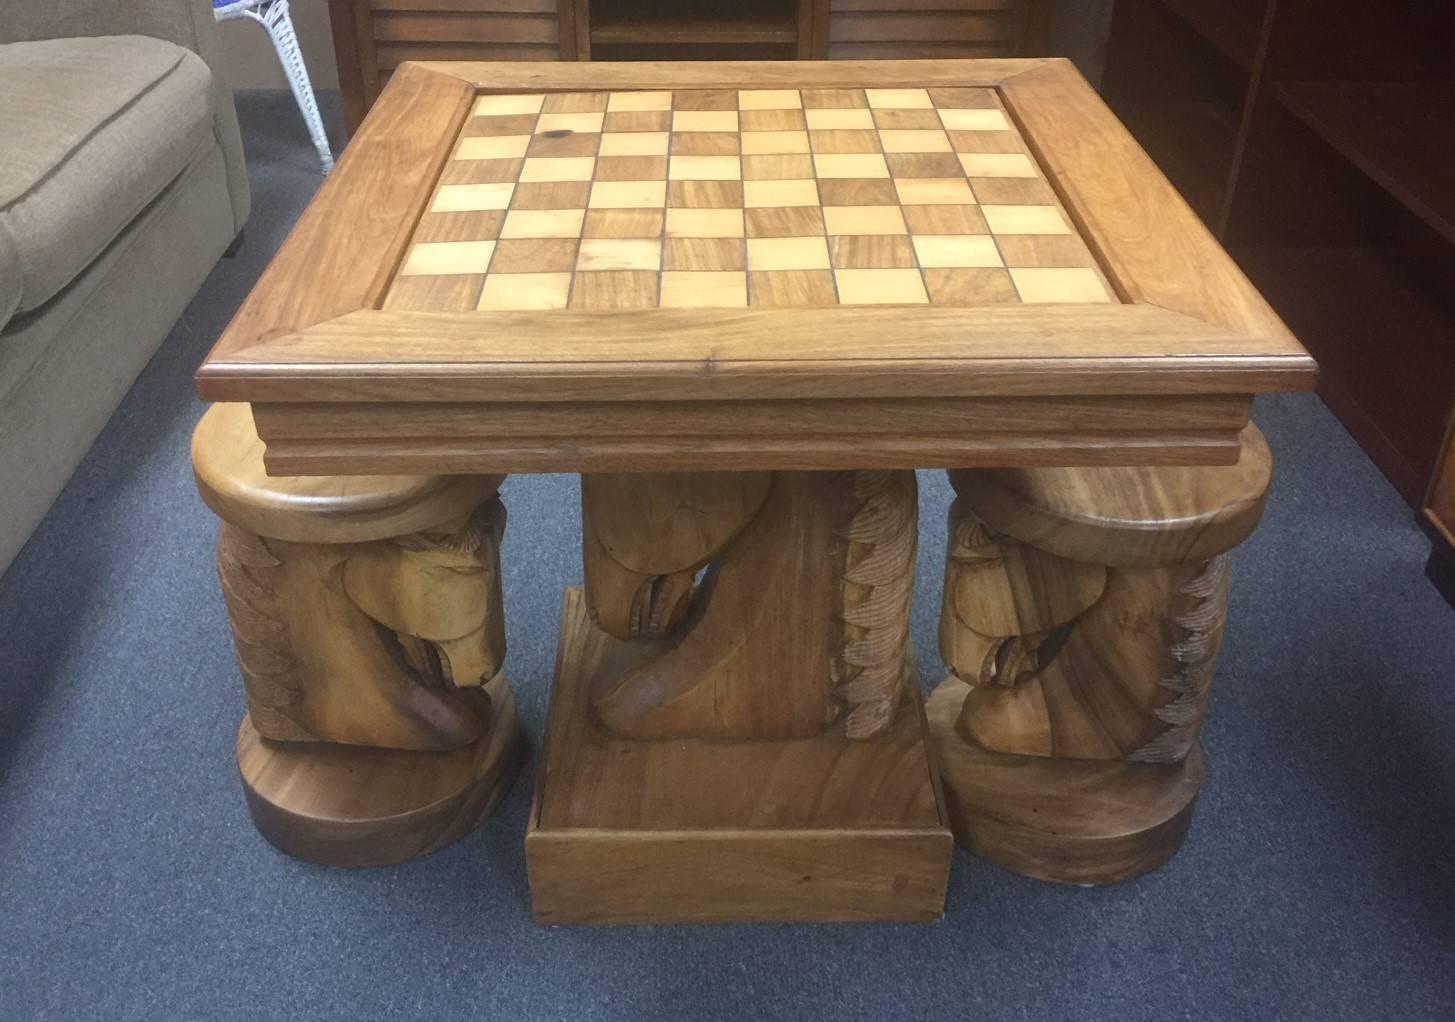 An iconic knight / horse head chess / backgammon game table with matching horse head seats, circa 1960s. The tabletop is supported by a pedestal carved in the form of a horse head and sits on a square wood base. The set is in the style of William